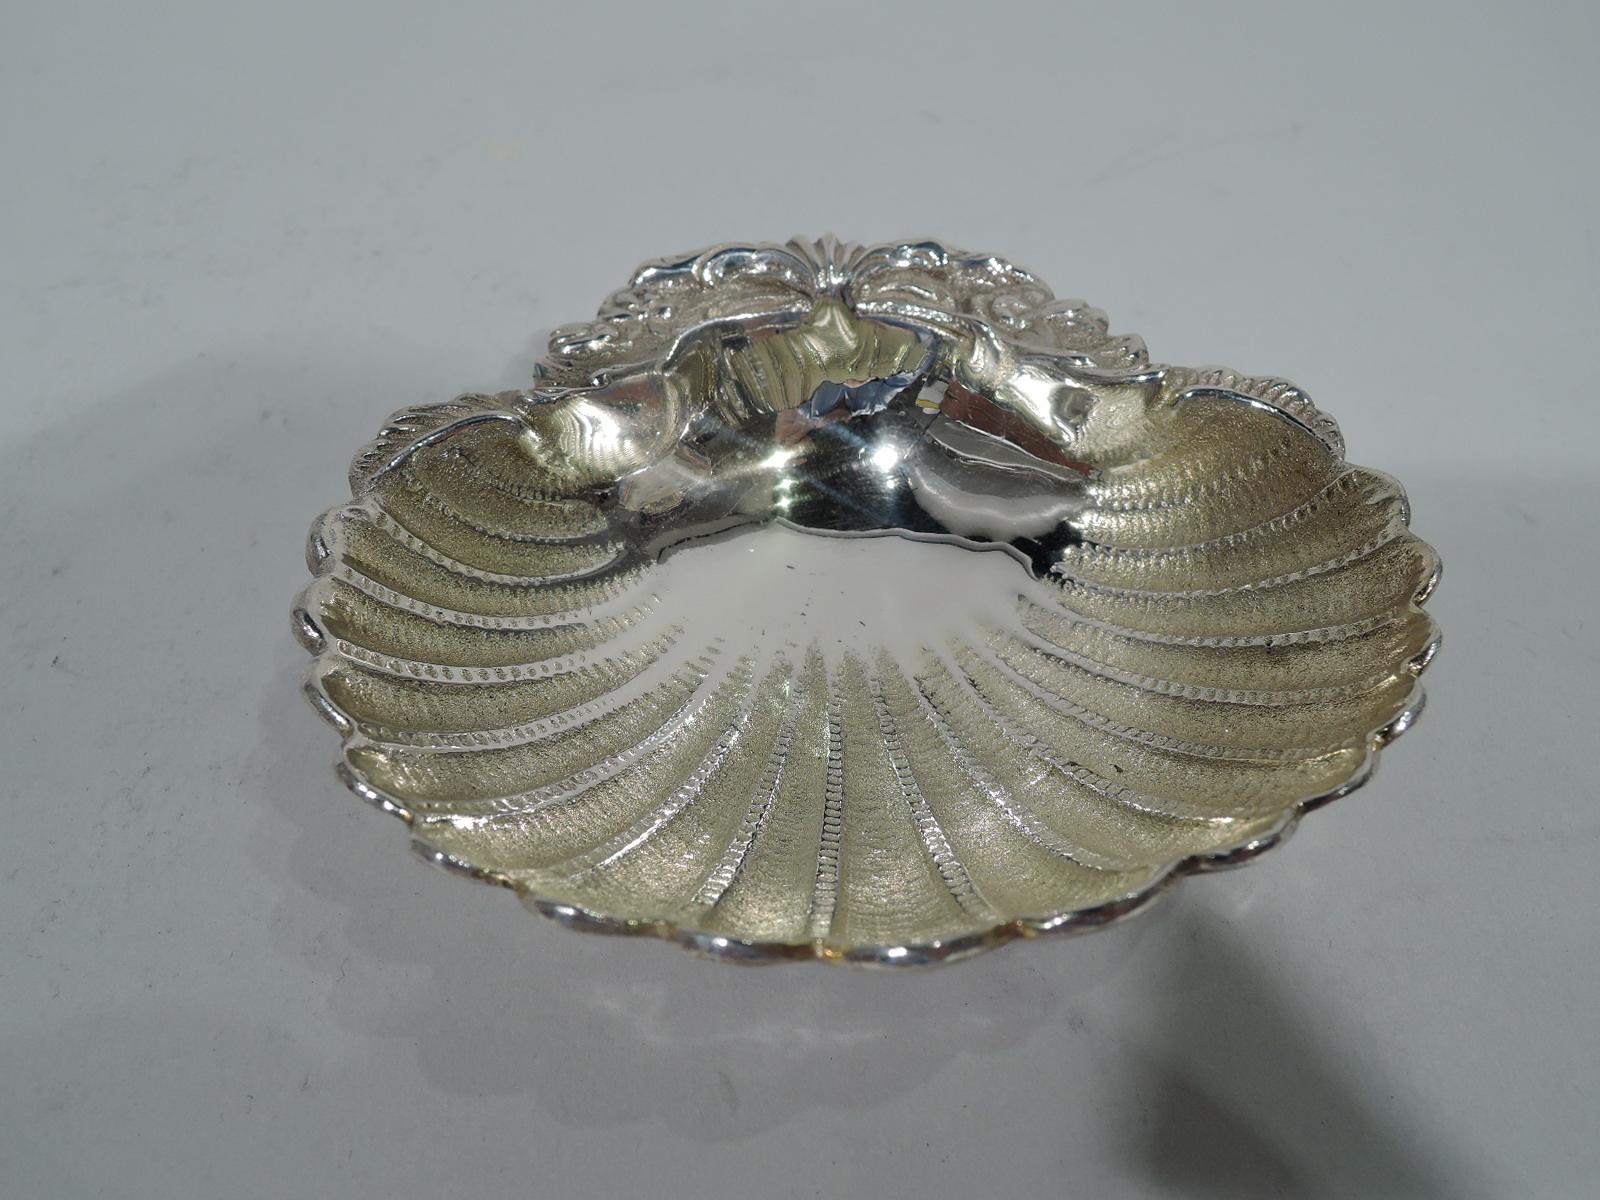 Pair of 800 silver scallop shells. Each: Stippled and pointille flutes and tooled flowers and scrolls. Interior gilt washed. Two ball supports. A traditional form with good heft and texture. Italian hallmark (1944-68). Heavy total weight: 11 troy